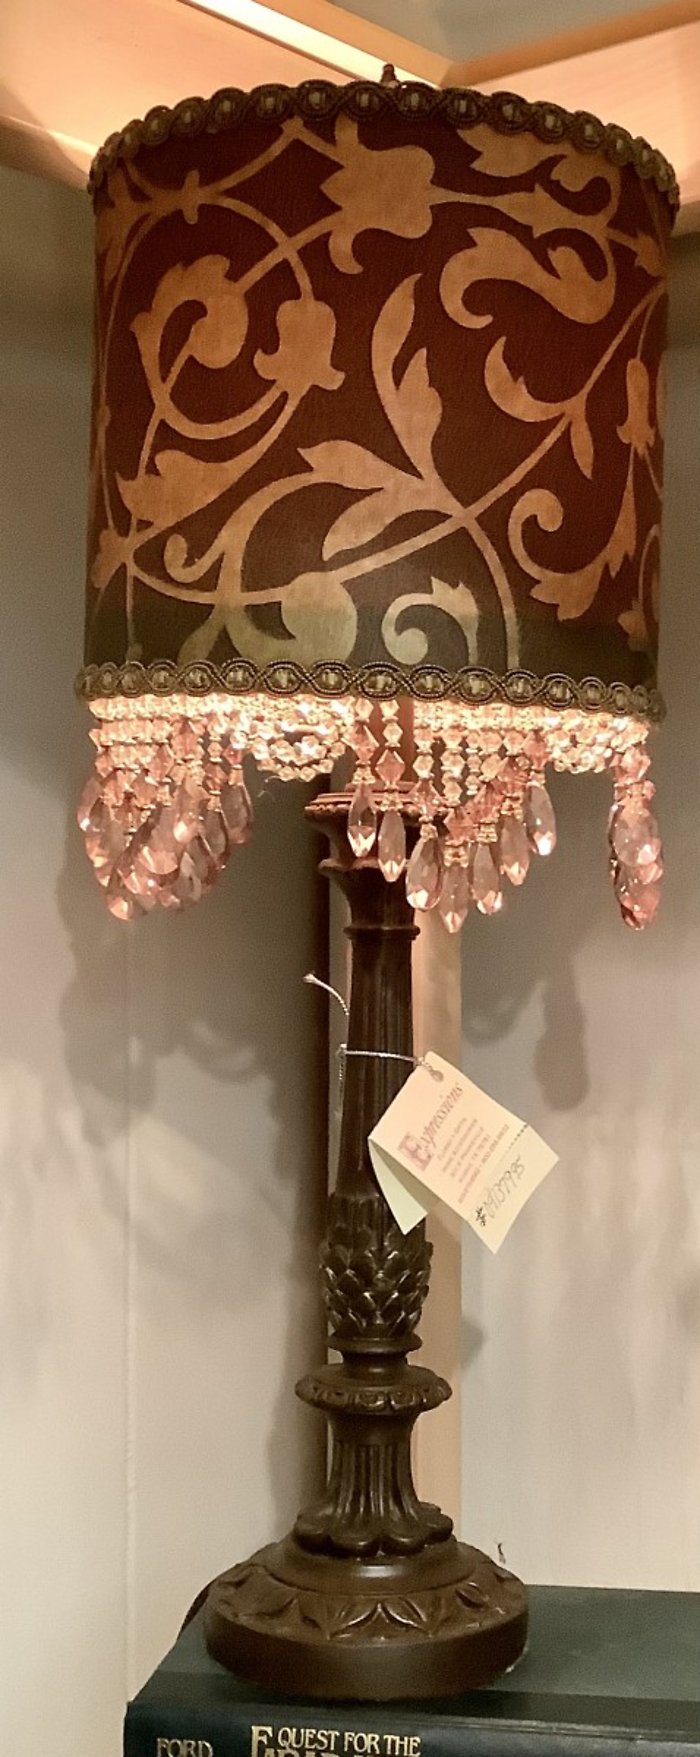 Vintage Lamp with Jewel Accents